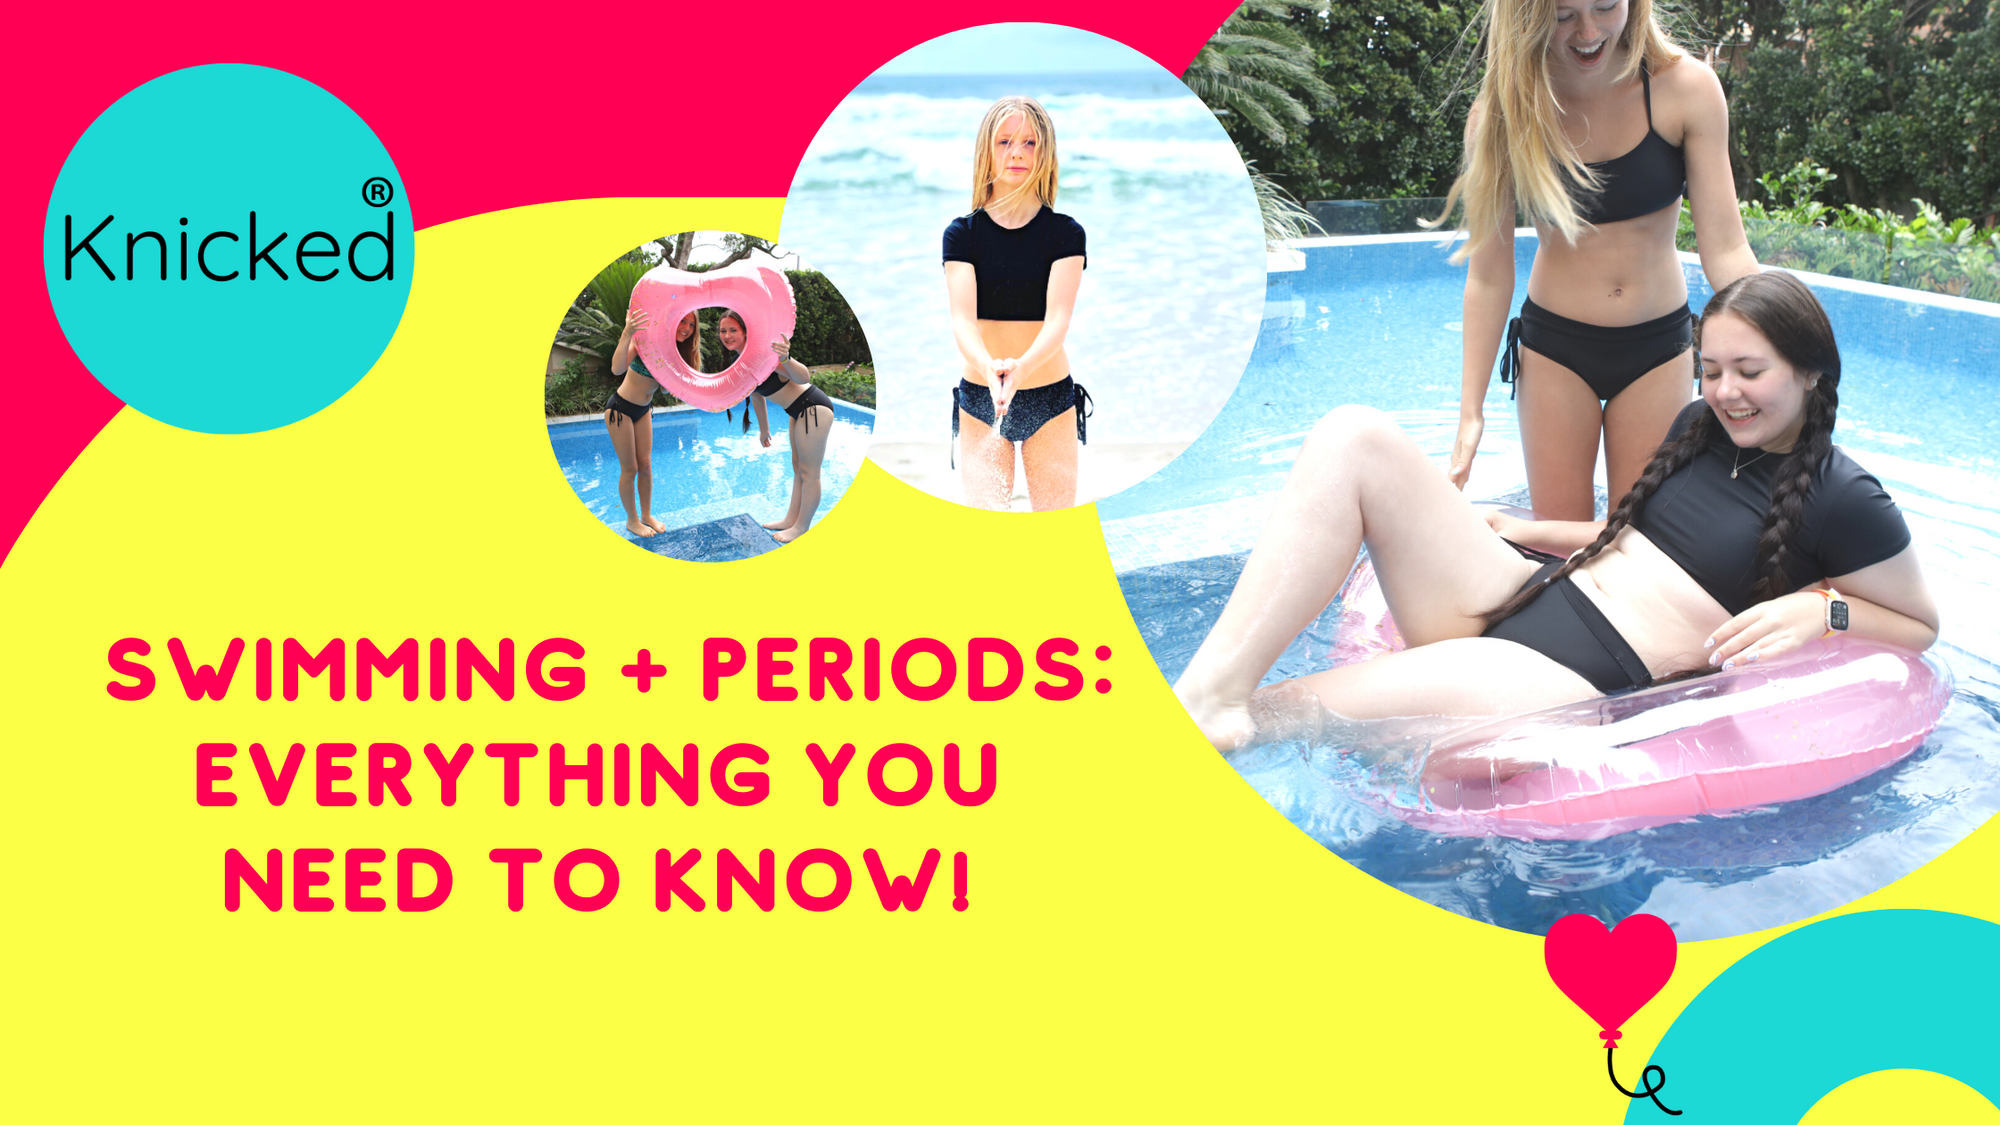 Swimming + periods: everything you need to know! - Knicked Australia